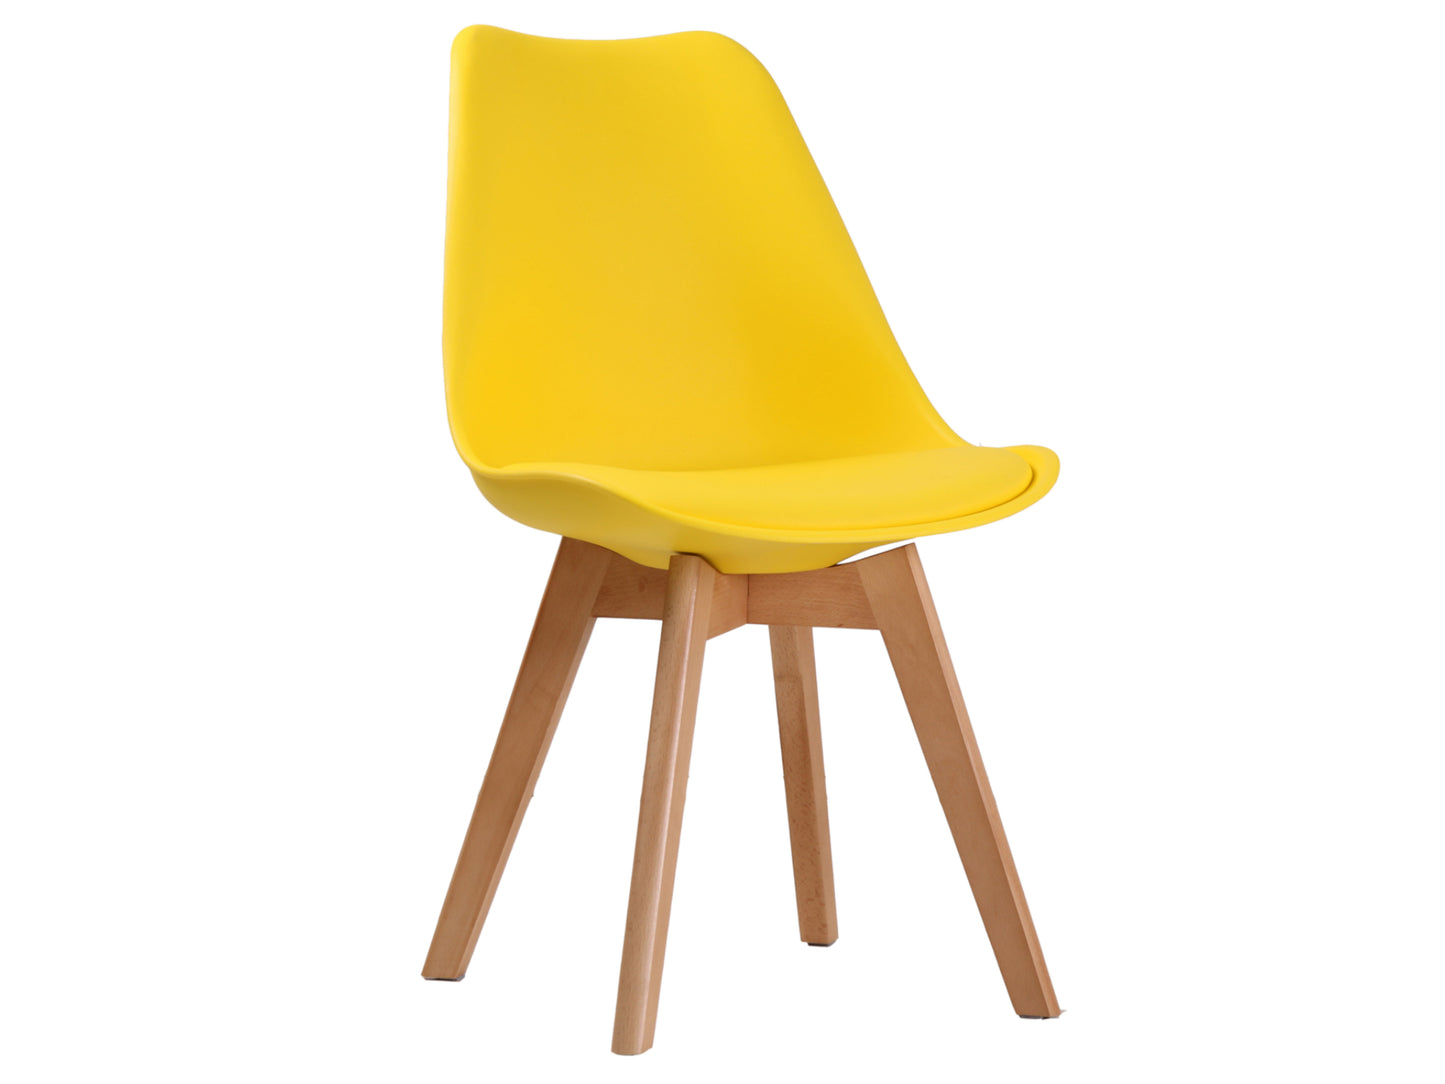 Louvre Dining Chair in Yellow (2 Pack)